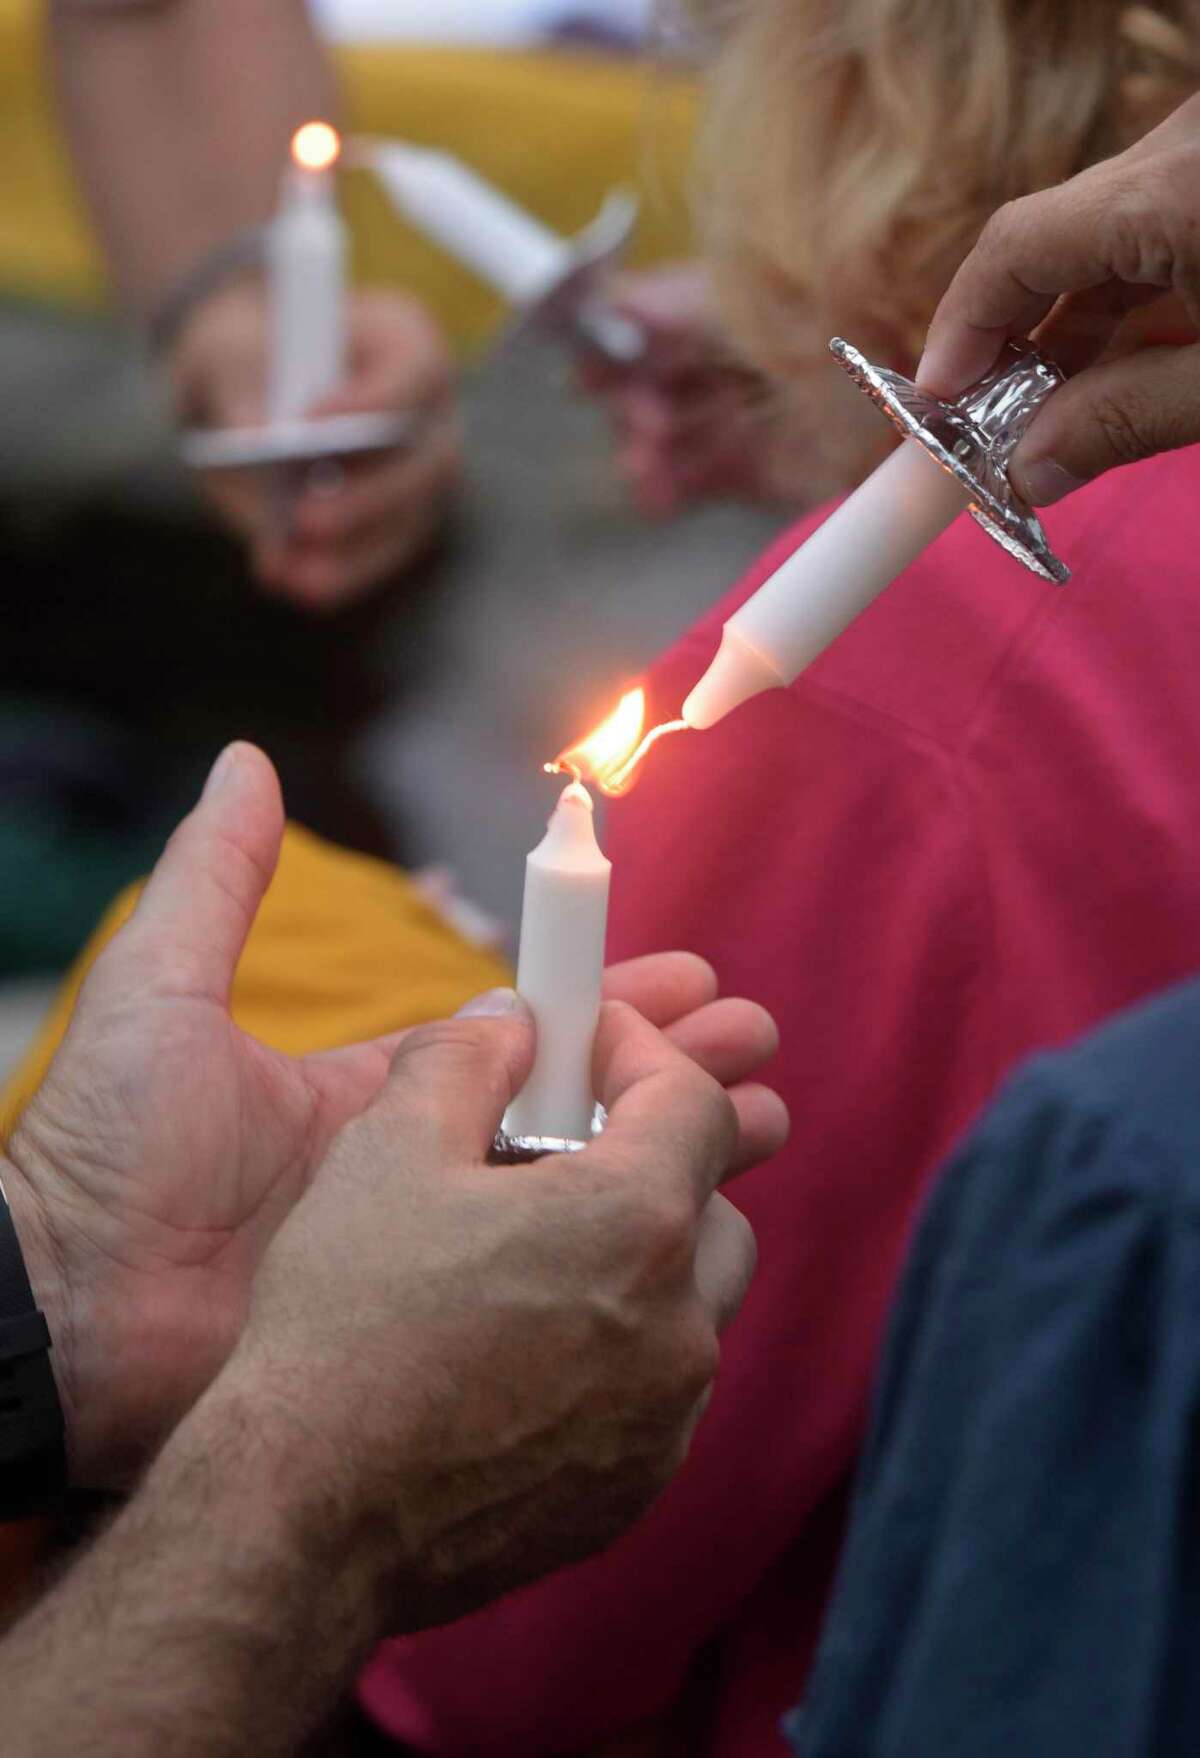 File photo of a people lighting candles from one another during The Heroin and Opiate Awareness Project (HERO) annual vigil to raise awareness of overdoses, held on the same day as International Overdose Awareness Day. Friday, August 31, 2018, at United Methodist Church, Bethel, Conn.